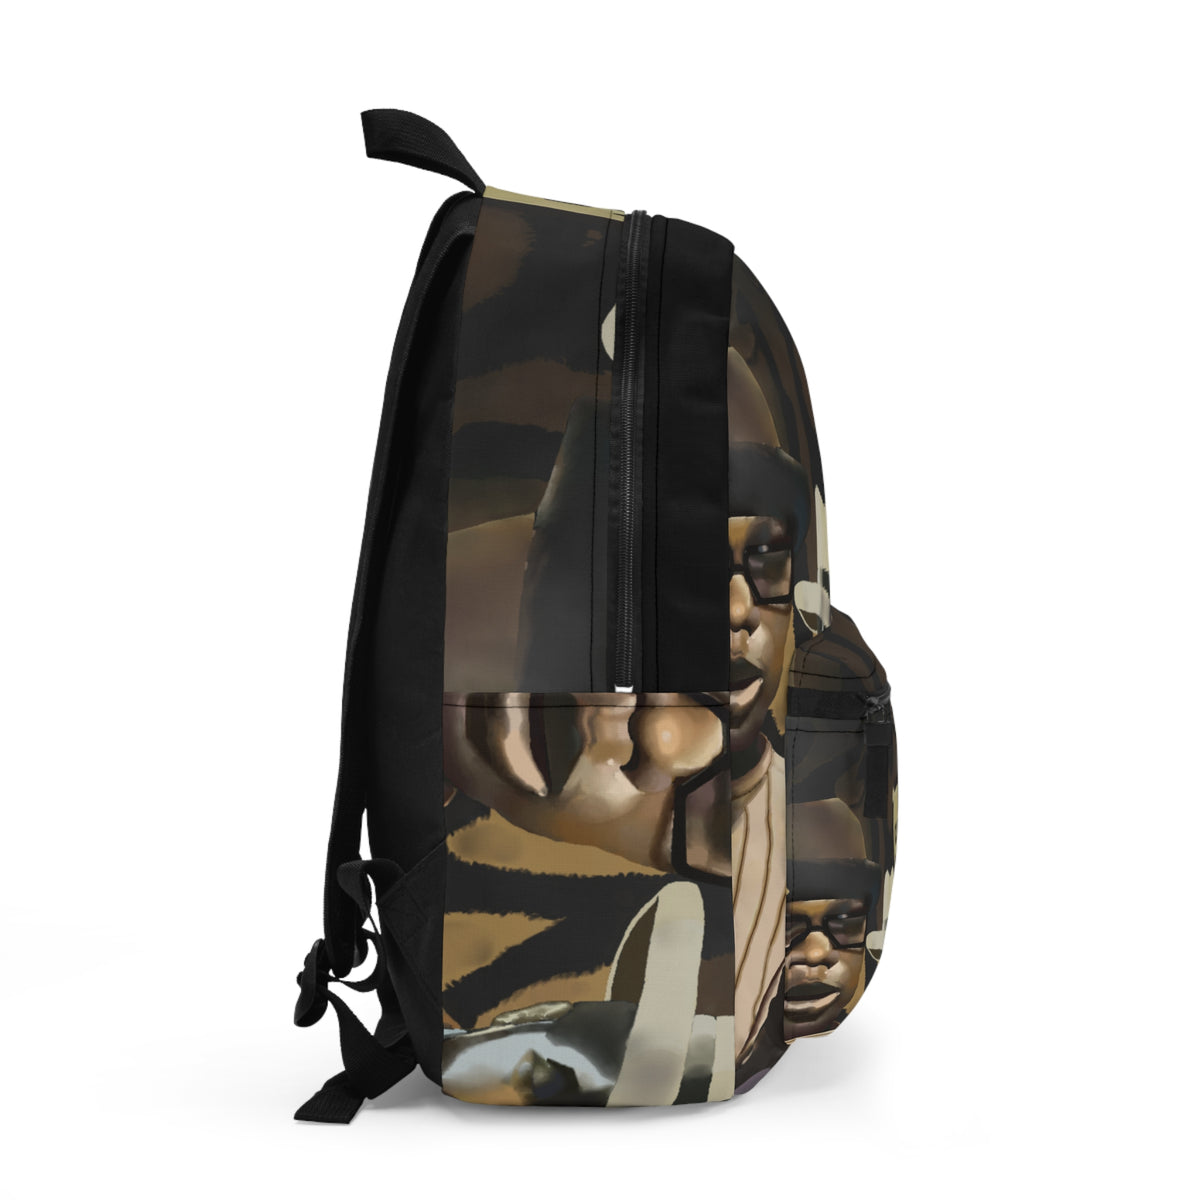 You know the name of the game Backpack